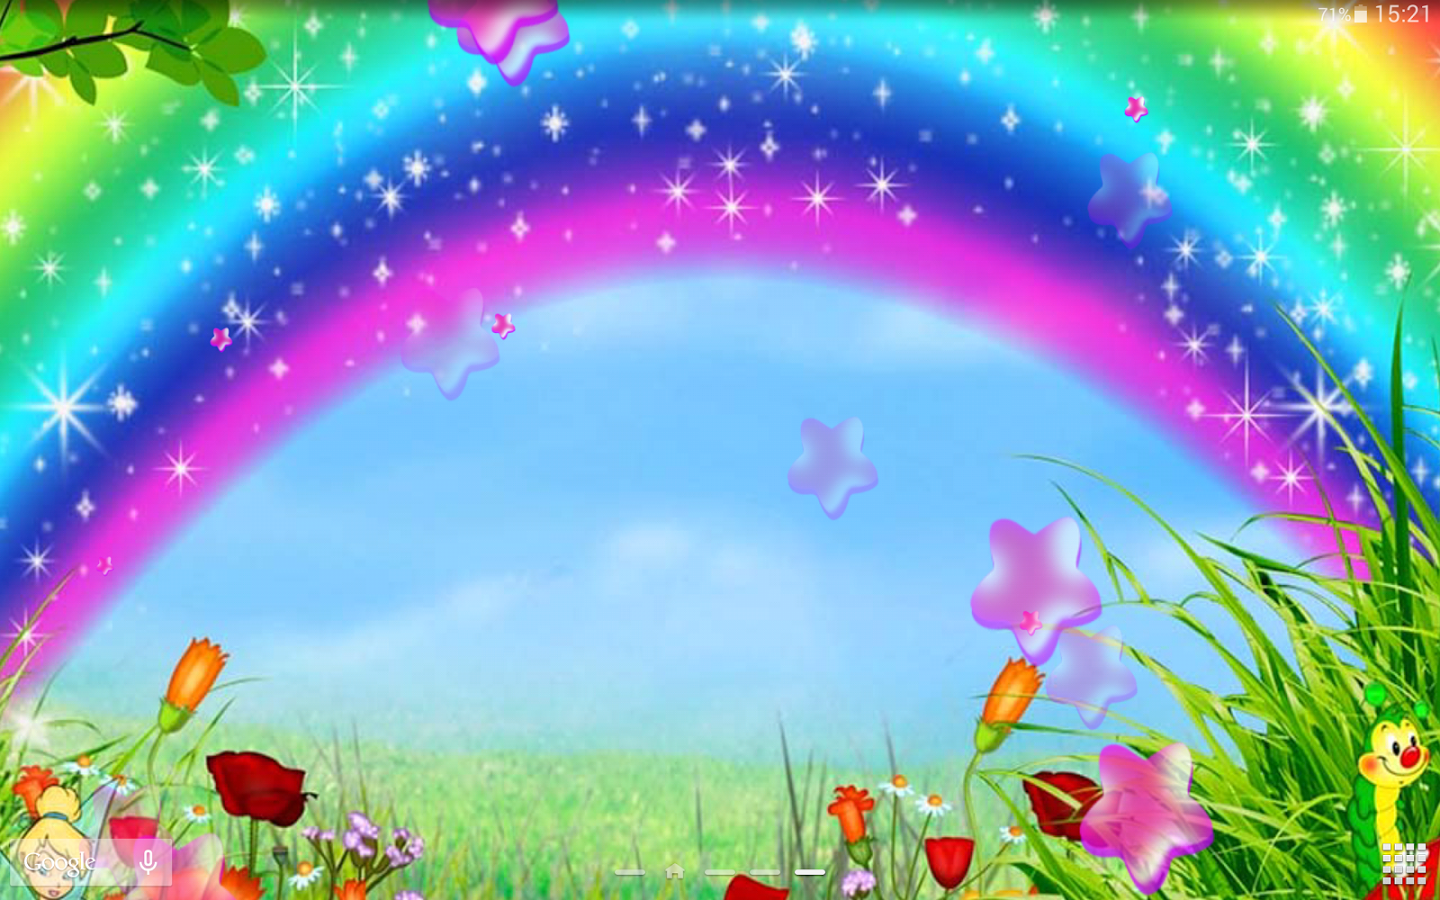 Cute Rainbow Live Wallpaper - Android Apps on Google Play